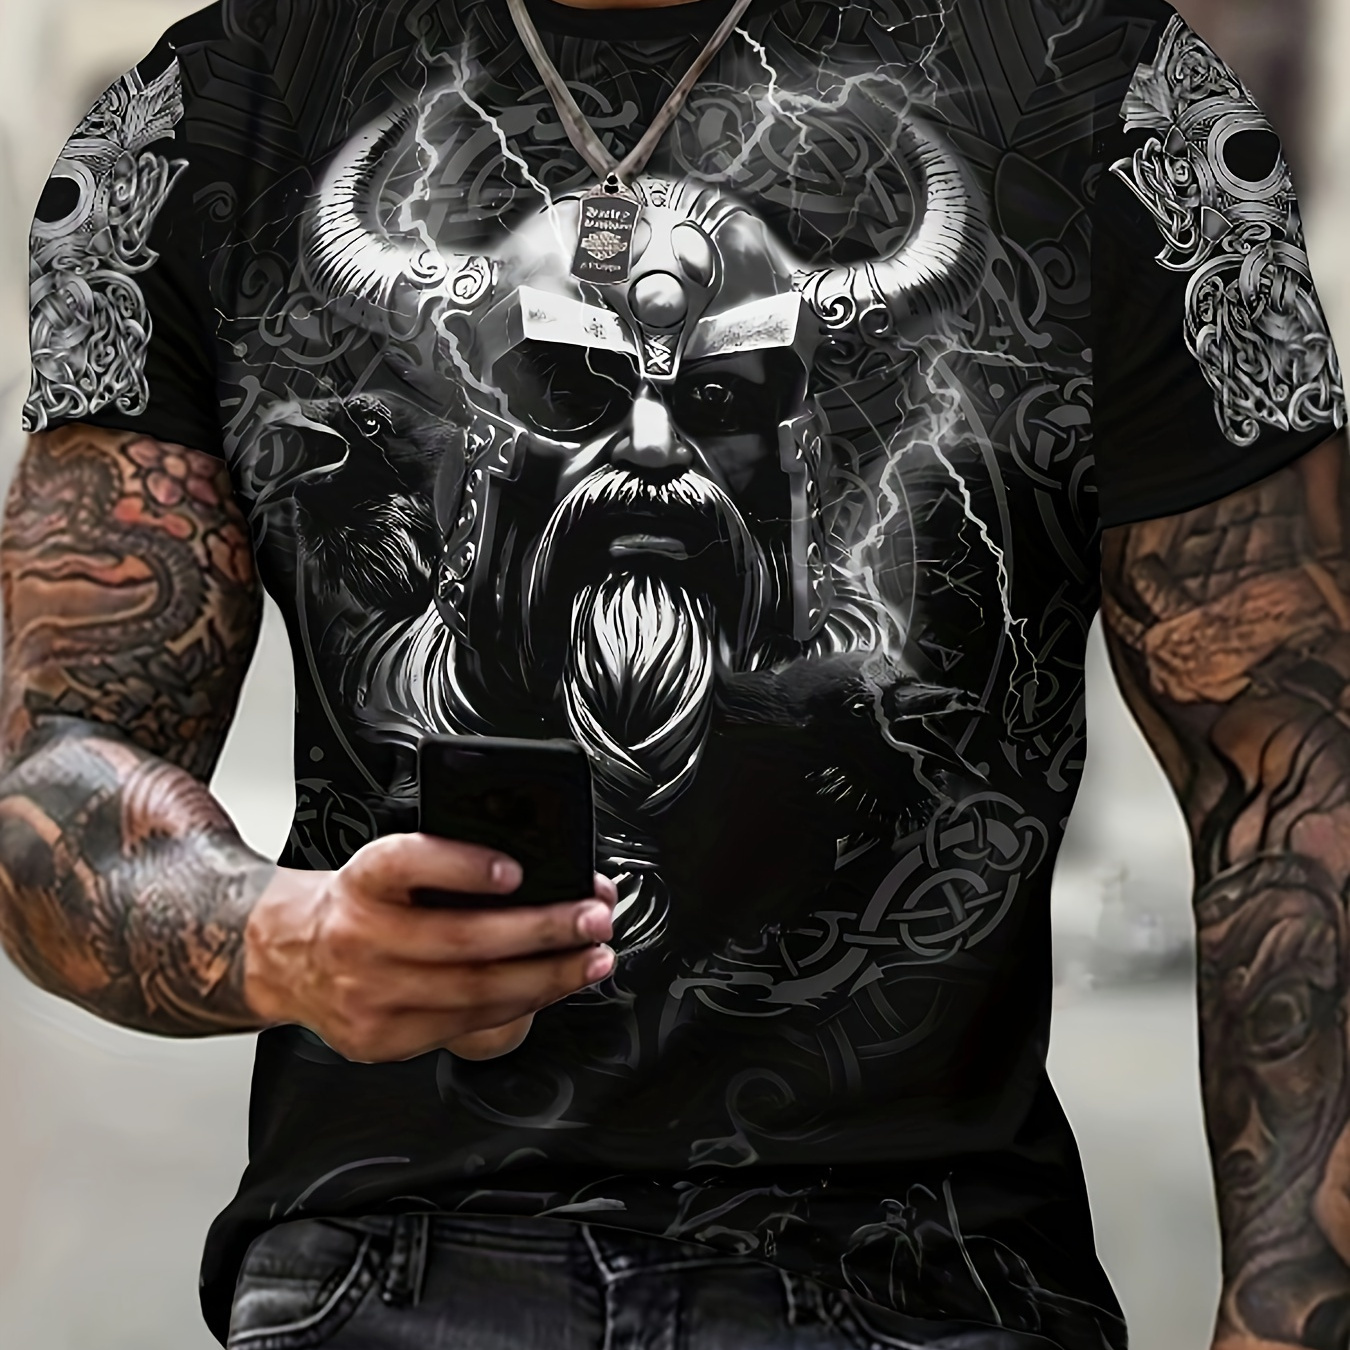 

Warrior Print T-shirt, Men's Casual Street Style Stretch Round Neck Tee Shirt For Summer